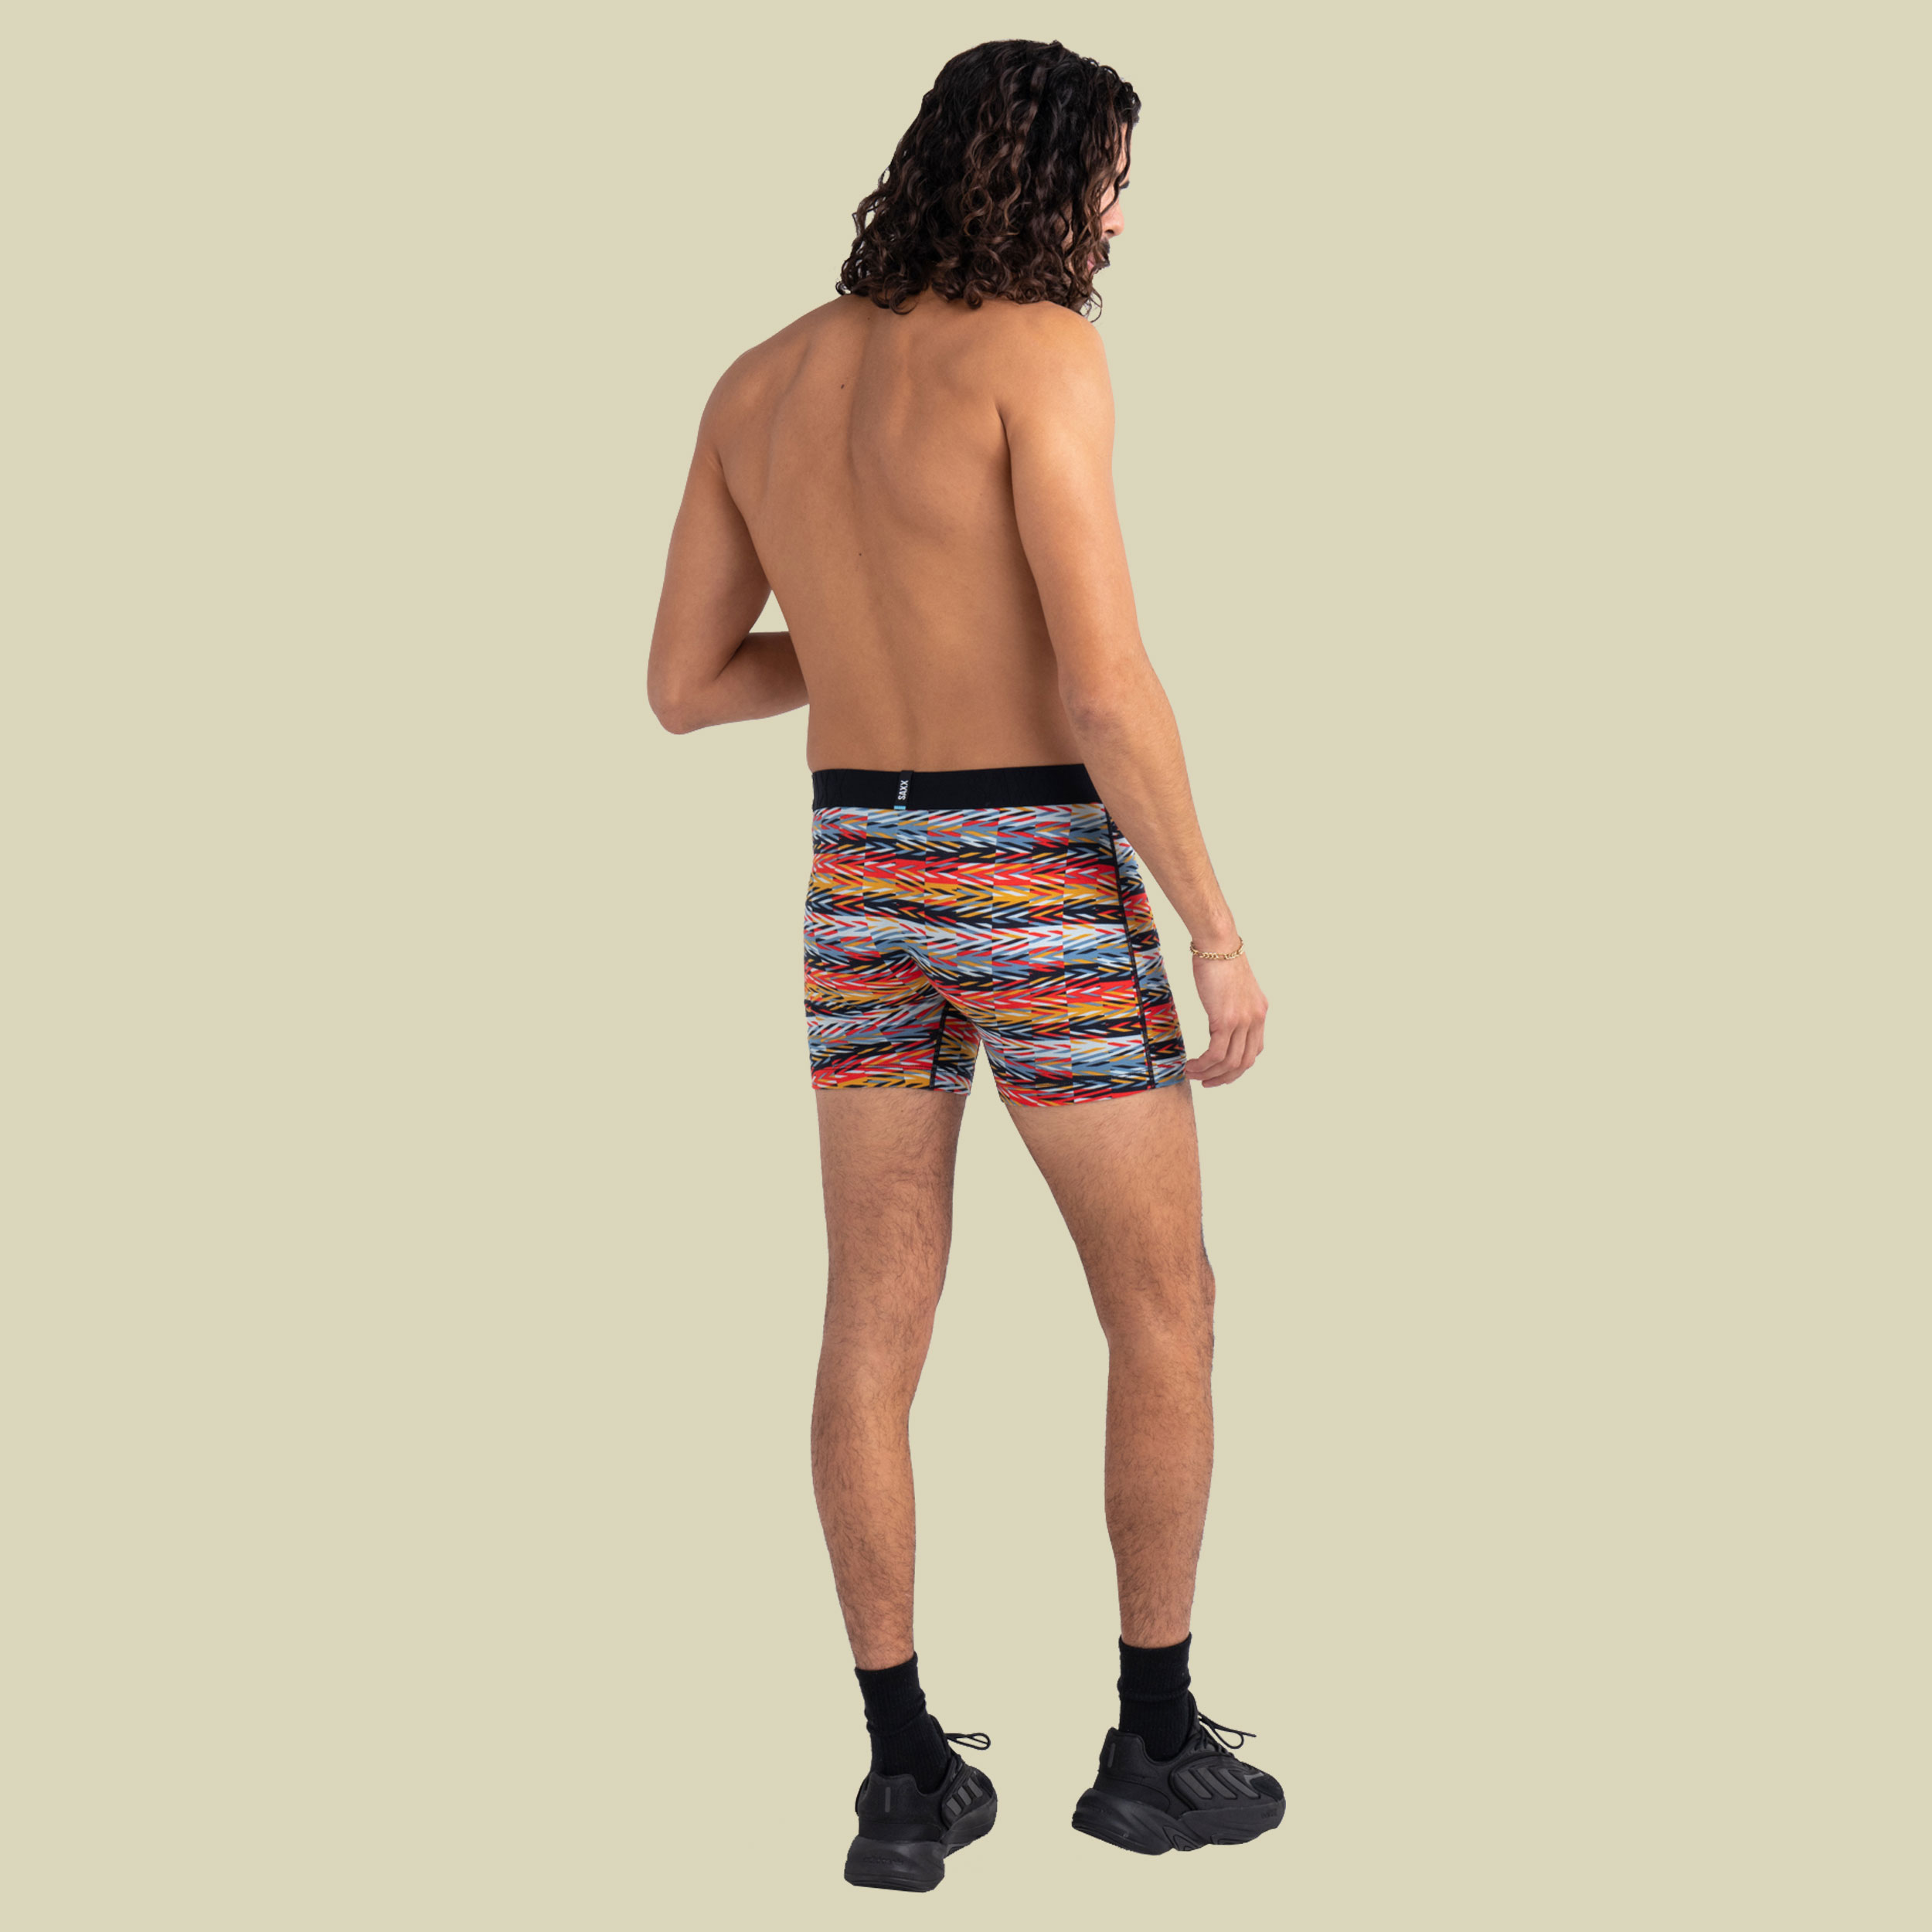 Droptemp Cooling Cotton Boxer Brief Fly 2pk XL mehrfarbig  - back & forth/black